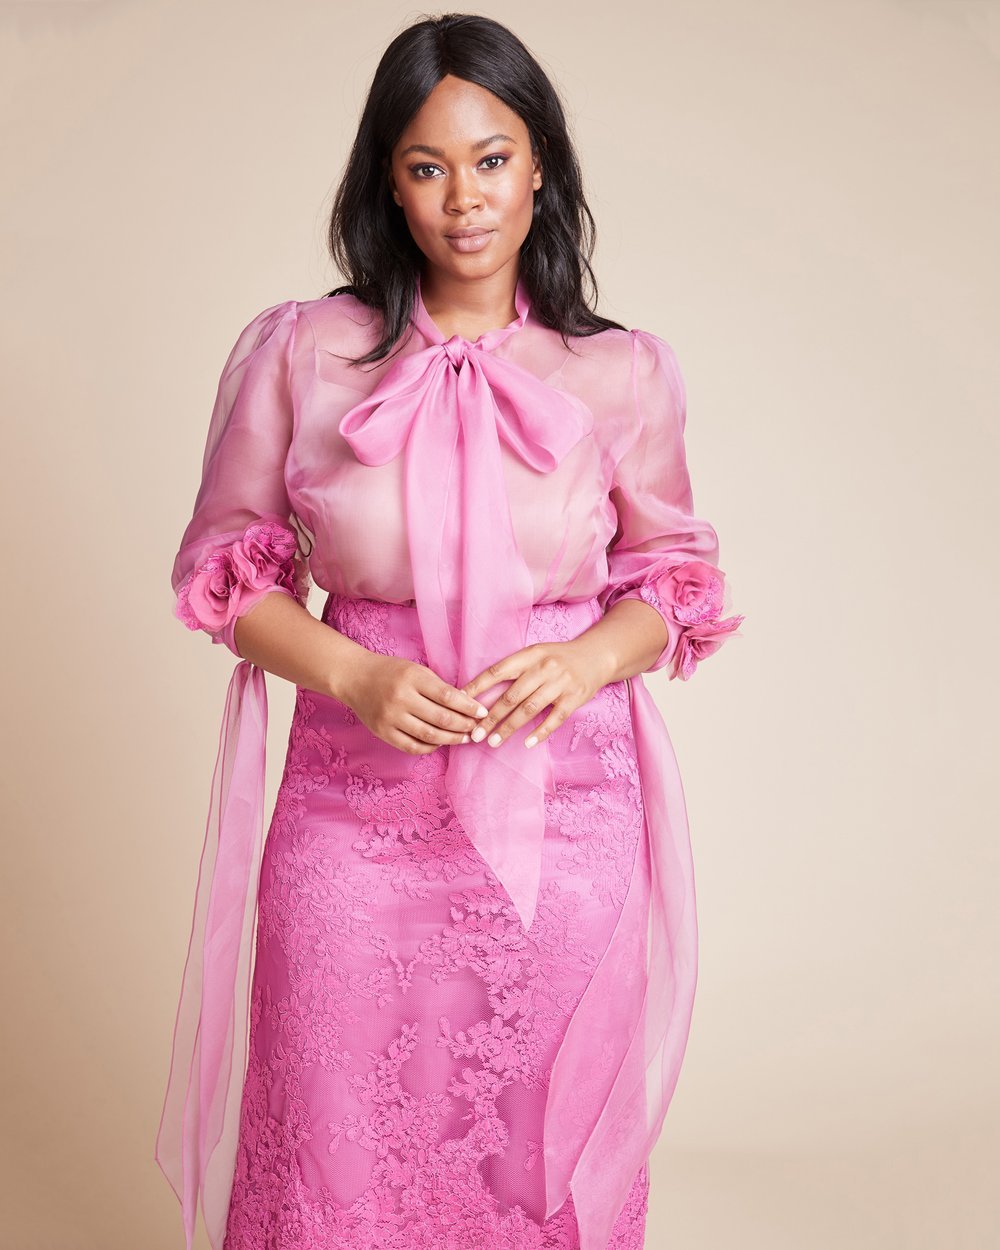 Luxury Plus SIze Fashion Finds at 11 Honore: MARCHESA Silk Organza Plus Size Blouse